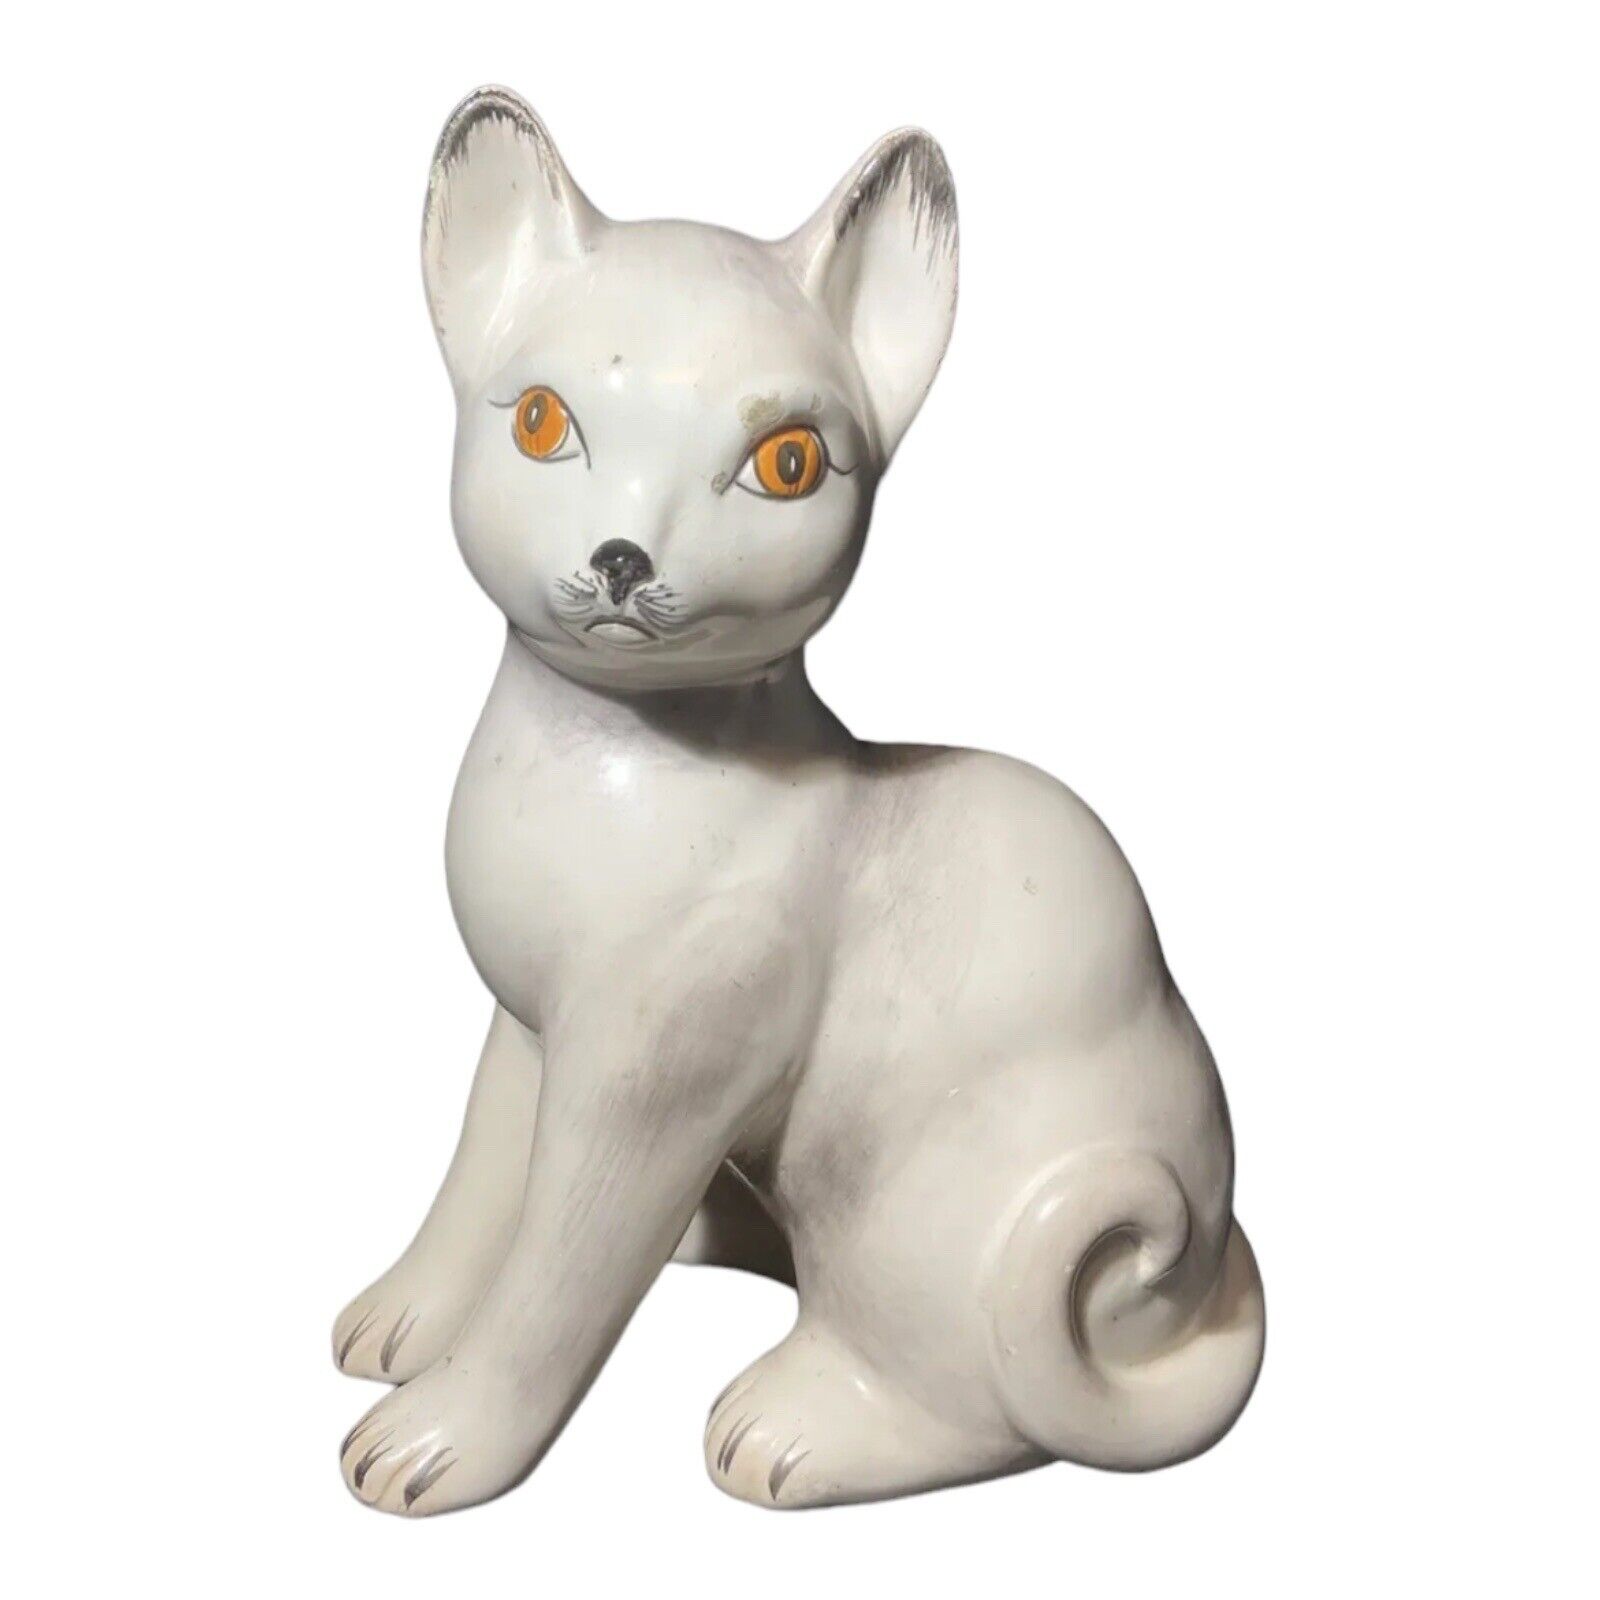 VINTAGE MADE IN ITALY CERAMIC WHITE CAT SITTING YELLOW EYES